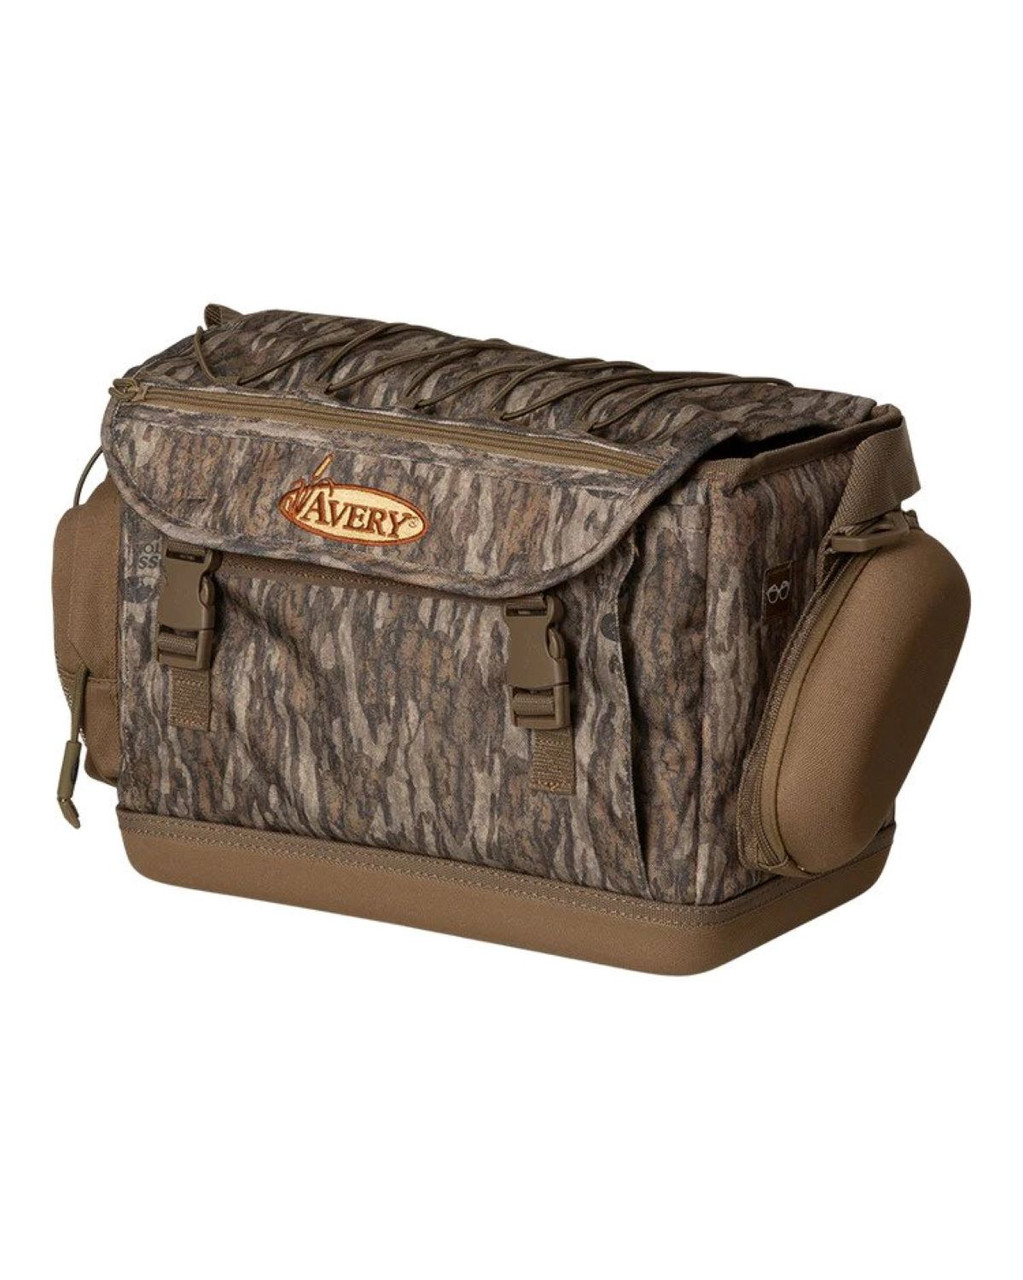 Banded Floating 3.0 Blind Bag Heavy Duty 900D DuraMax -Bottomland- One Size